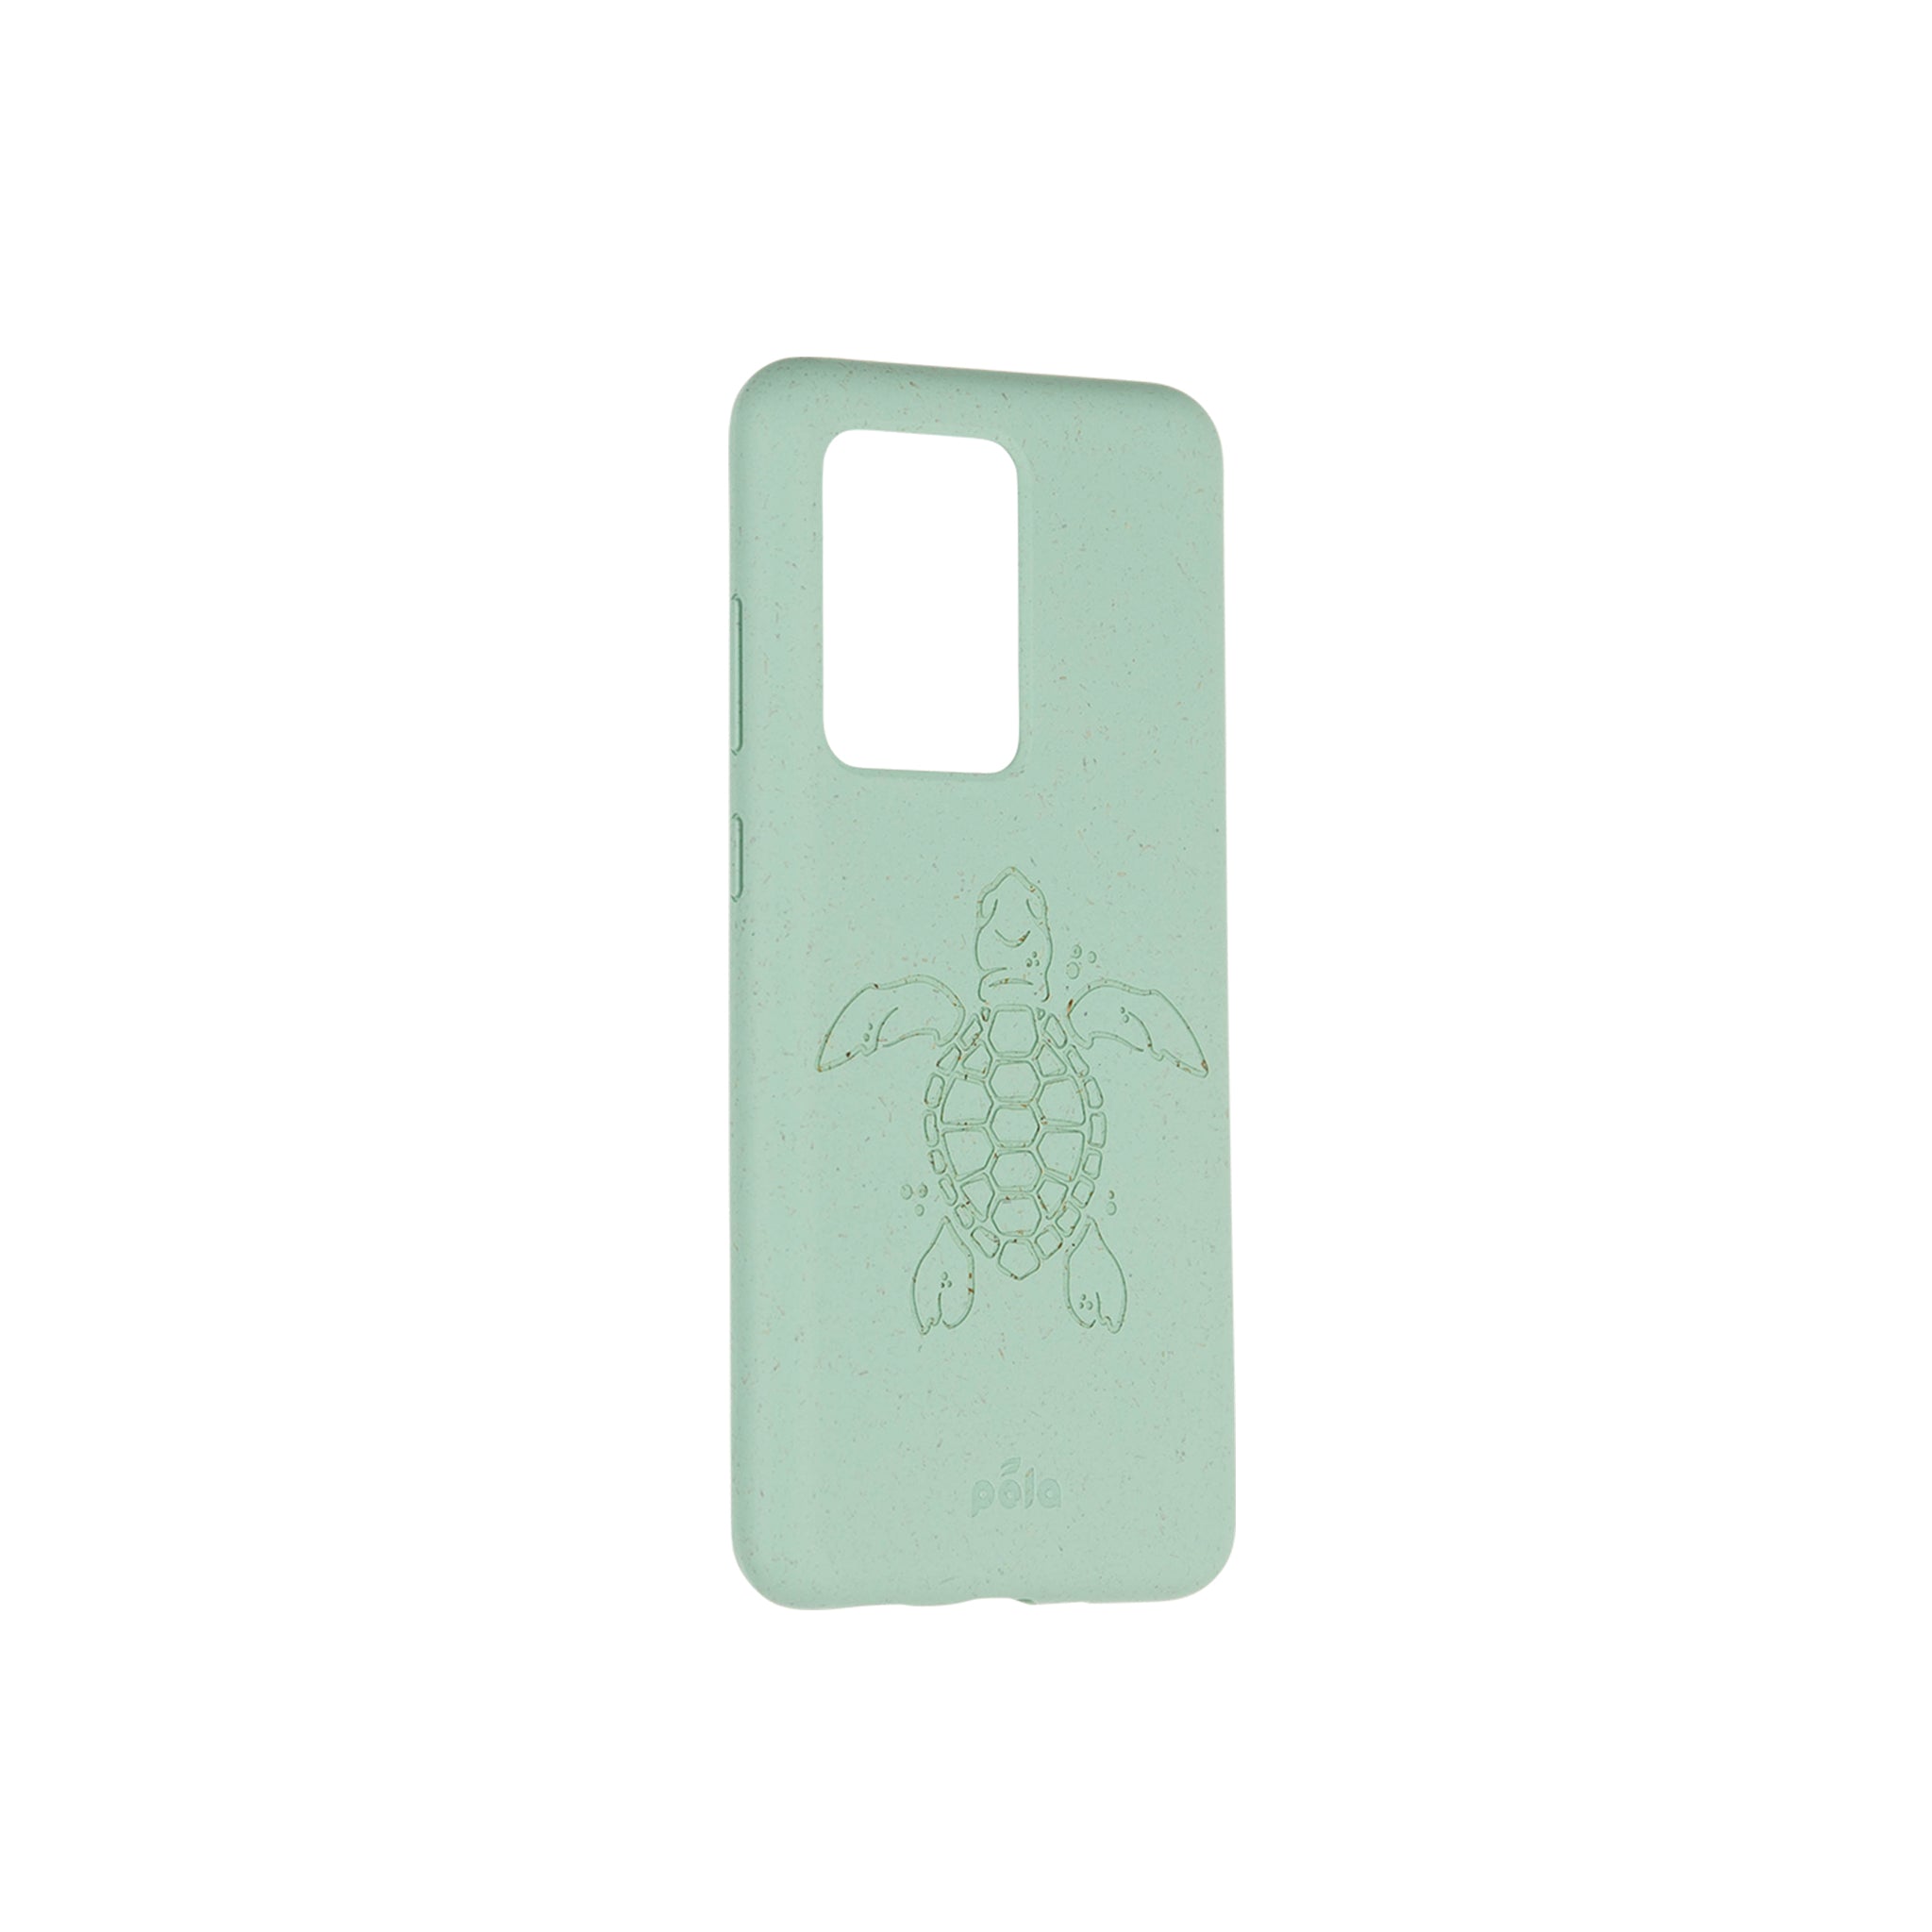 Pela - Eco Friendly Case For Samsung Galaxy S20 Plus - Ocean Turquoise Turtle Edition